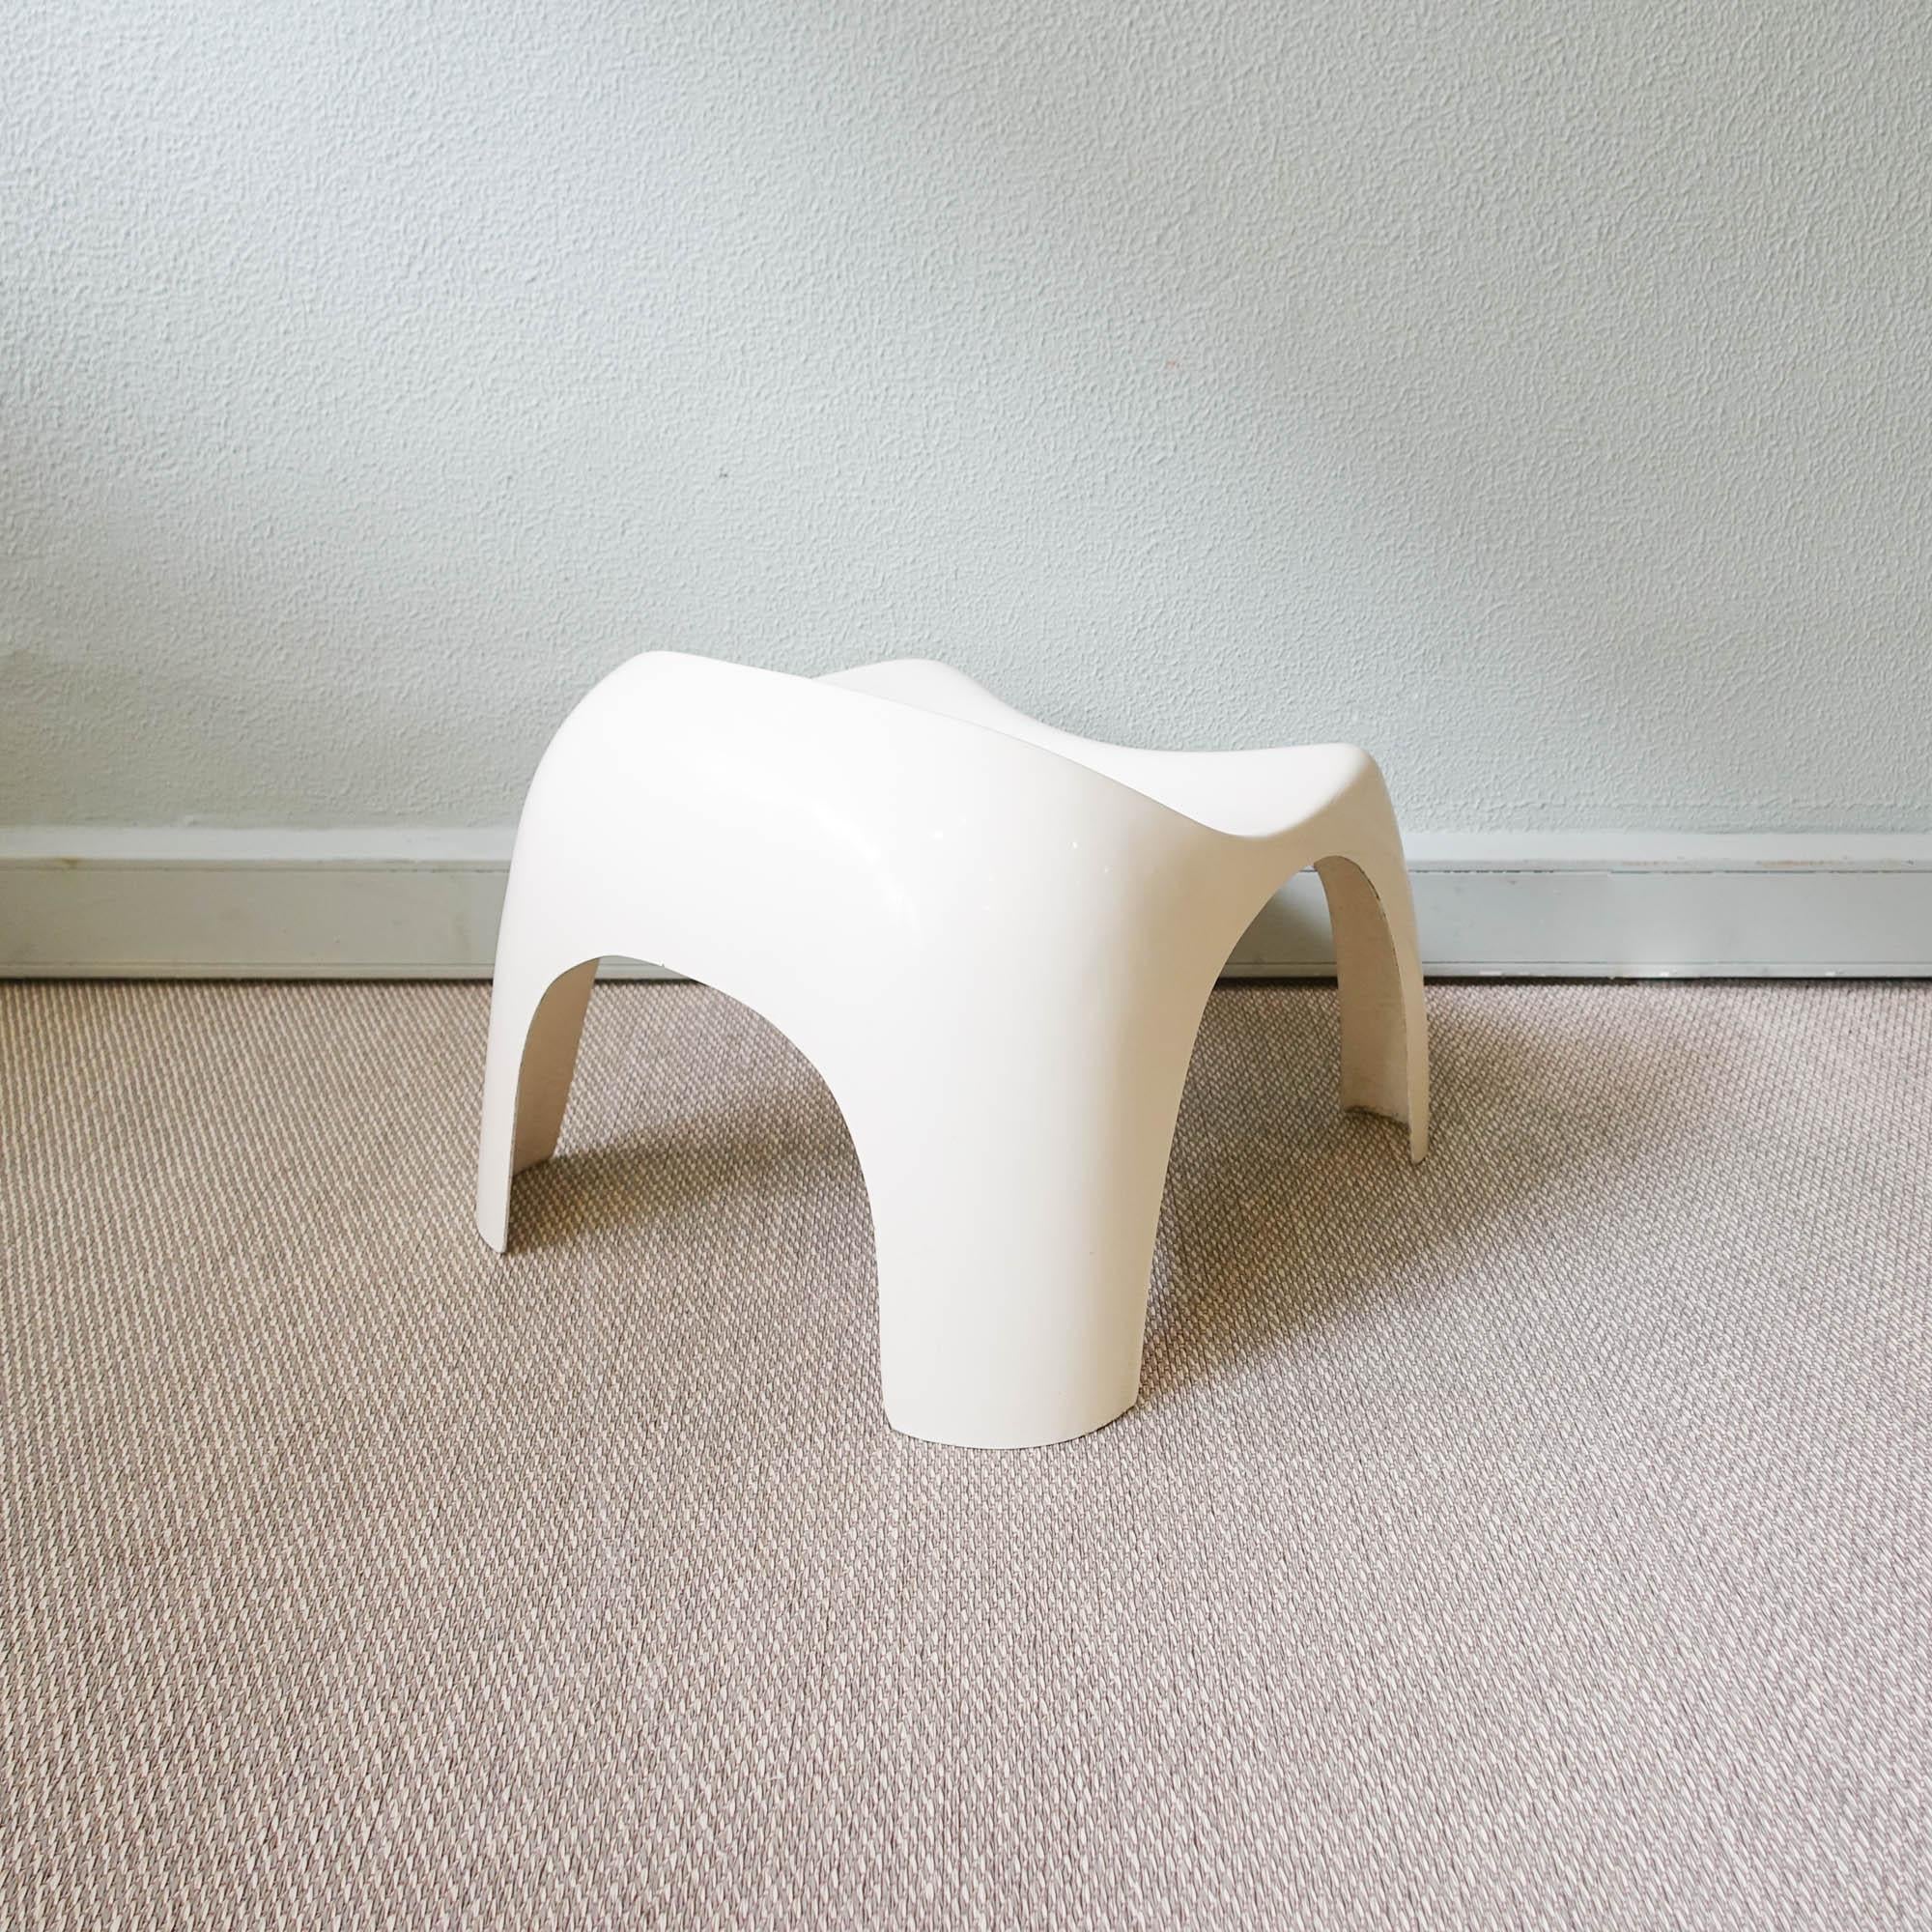 Late 20th Century Portuguese Fiberglass Stool in the style of Efebino by Stacy Duke for Artemide For Sale